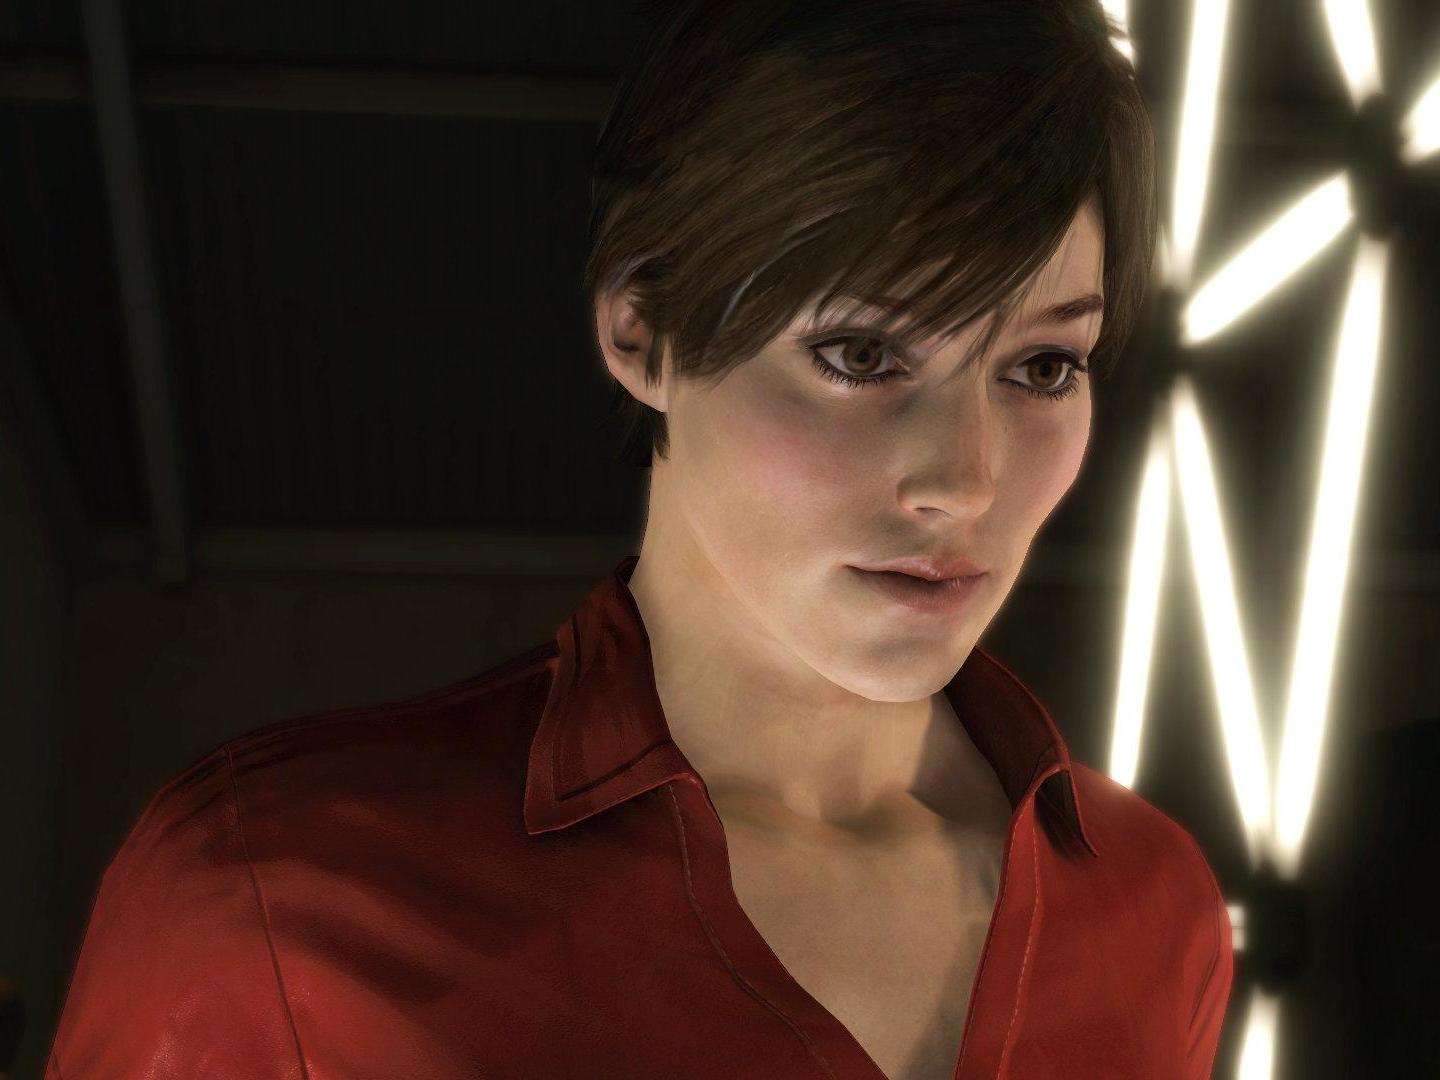 Madison, the game’s playable female character, is voiced by Judi Beecher